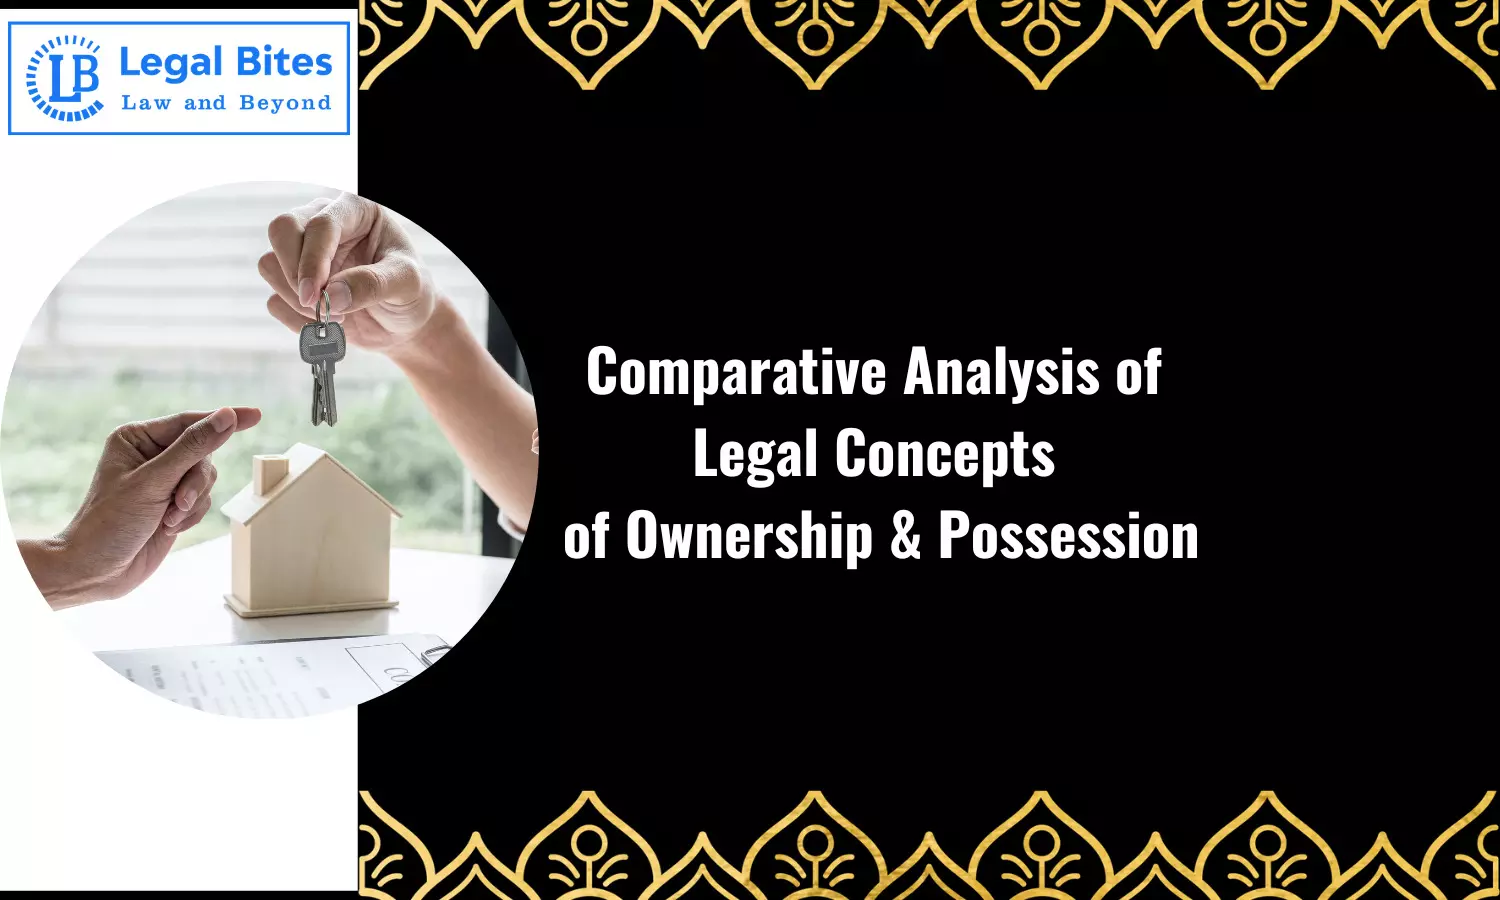 Comparative Analysis of Legal Concepts of Ownership & Possession